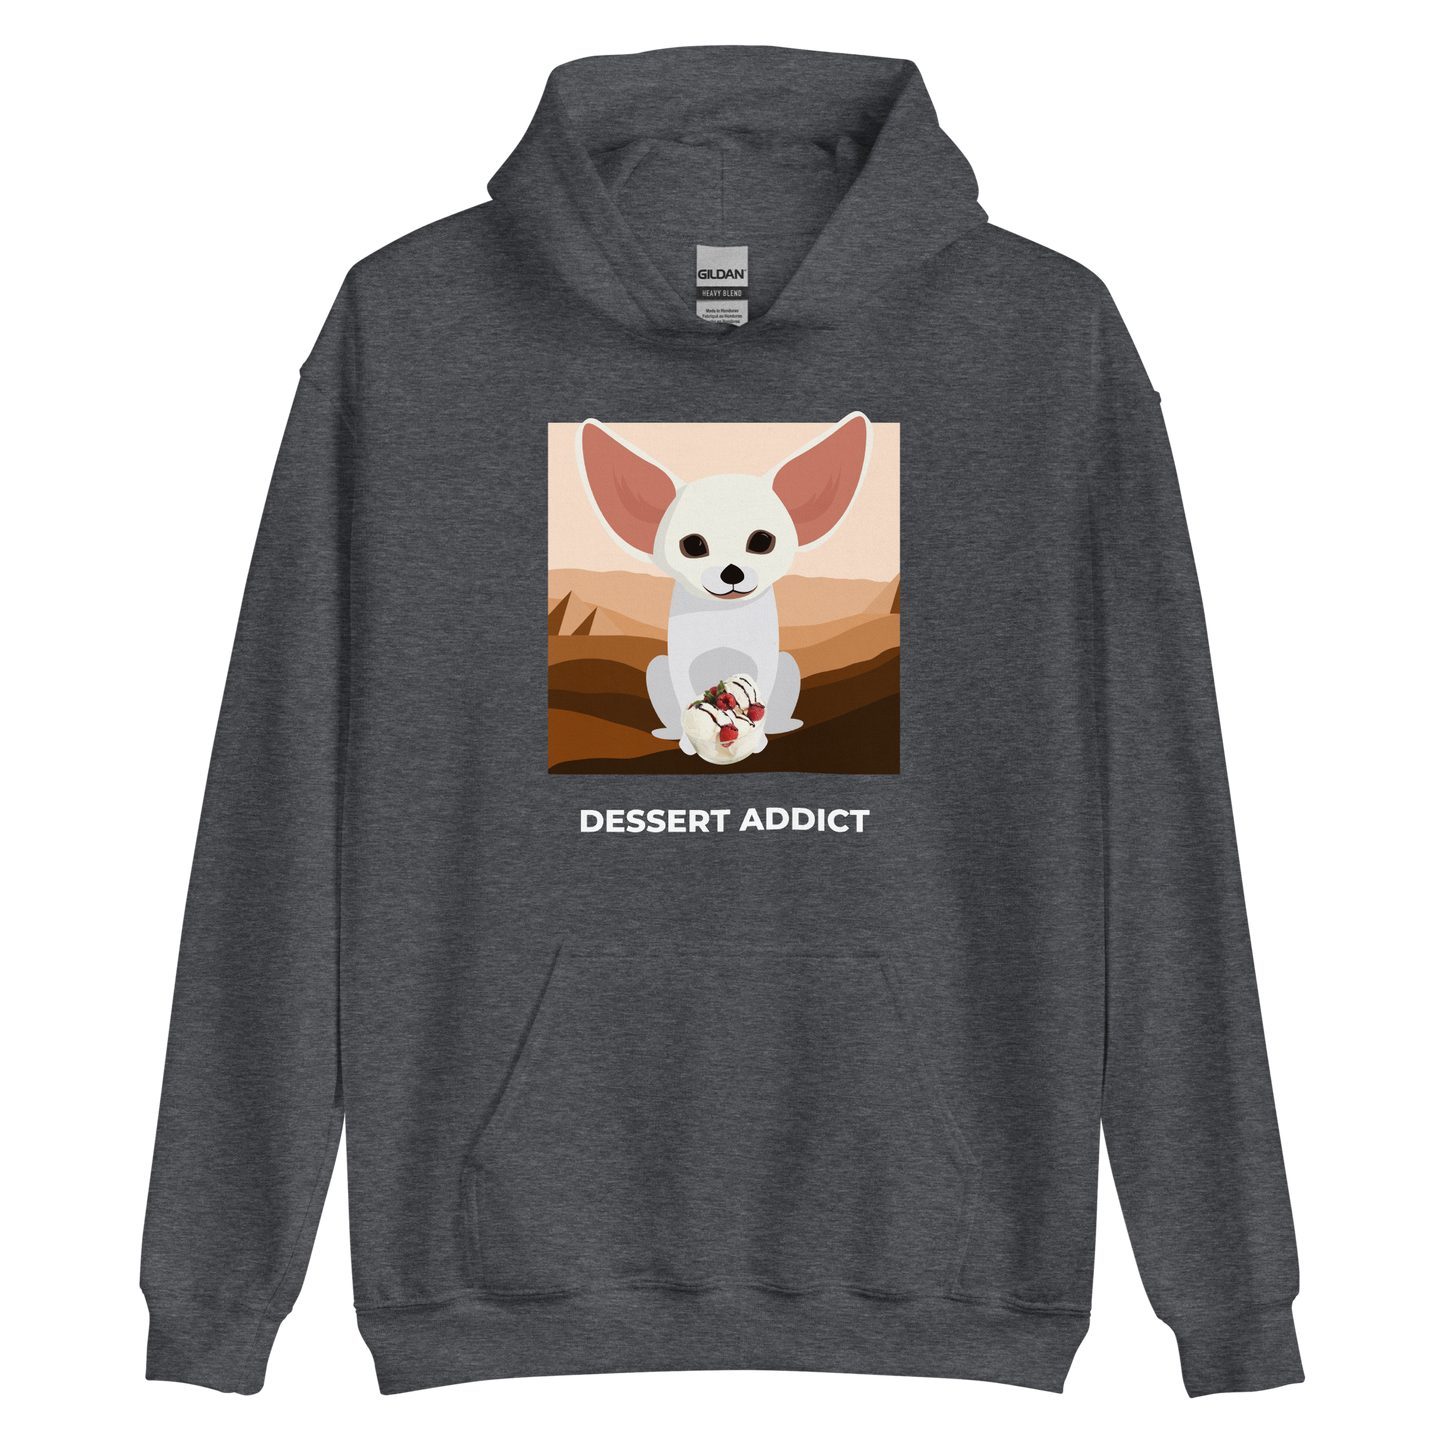 Dark Heather Fennec Fox Hoodie featuring an adorable Dessert Addict graphic on the chest - Funny Graphic Fennec Fox Hoodies - Boozy Fox